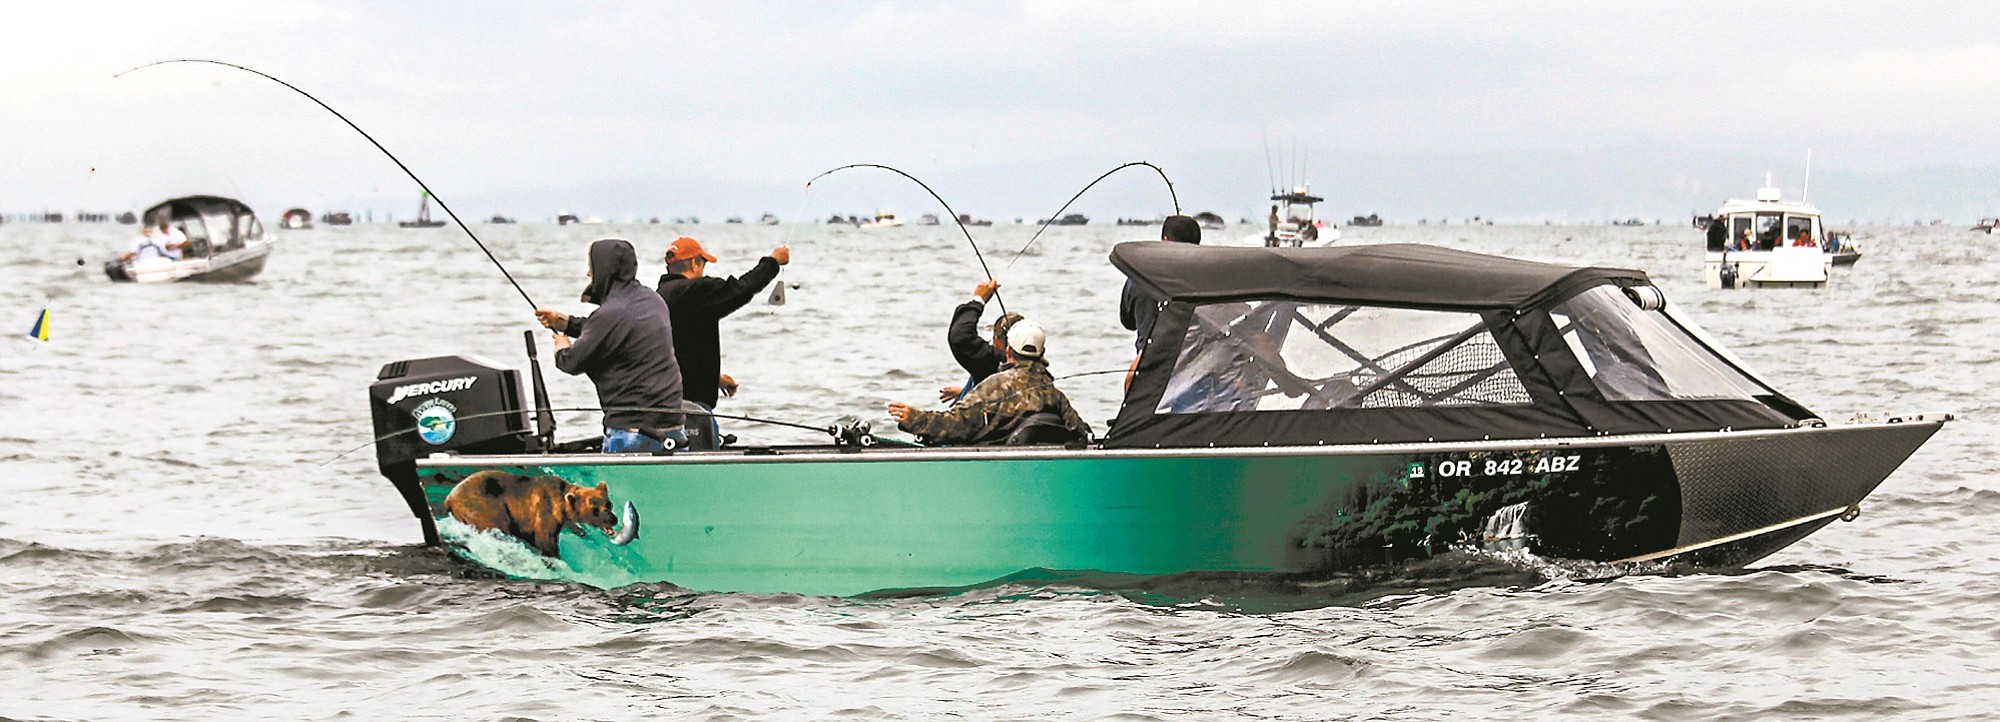 A goal of the joint state salmon plan is to allocate enough fall chinook salmon to the Buoy 10 fishery in the Columbia River estuary to allow retention from Aug.